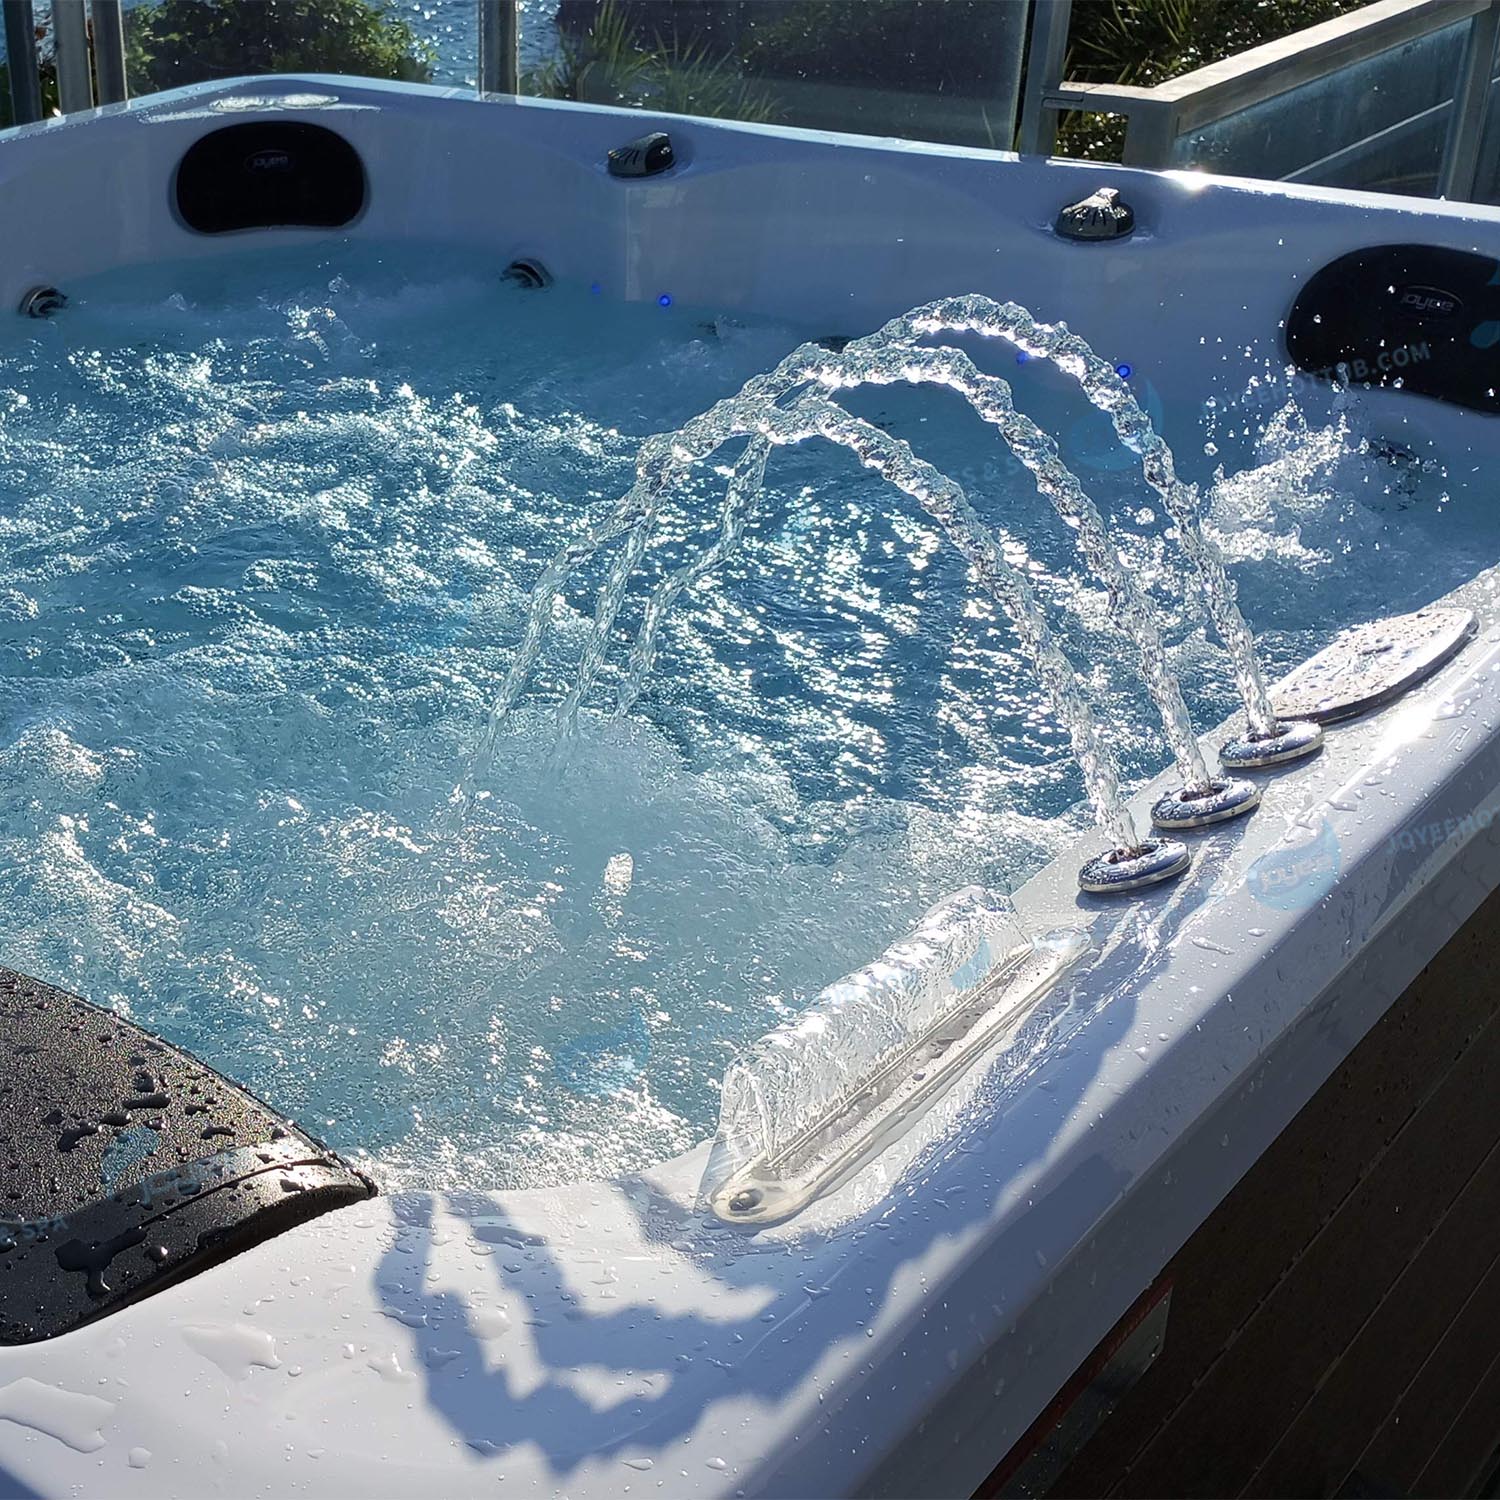 Revolutionizing Relaxation:  Whirlpool Baths with Air Bubble Jets  